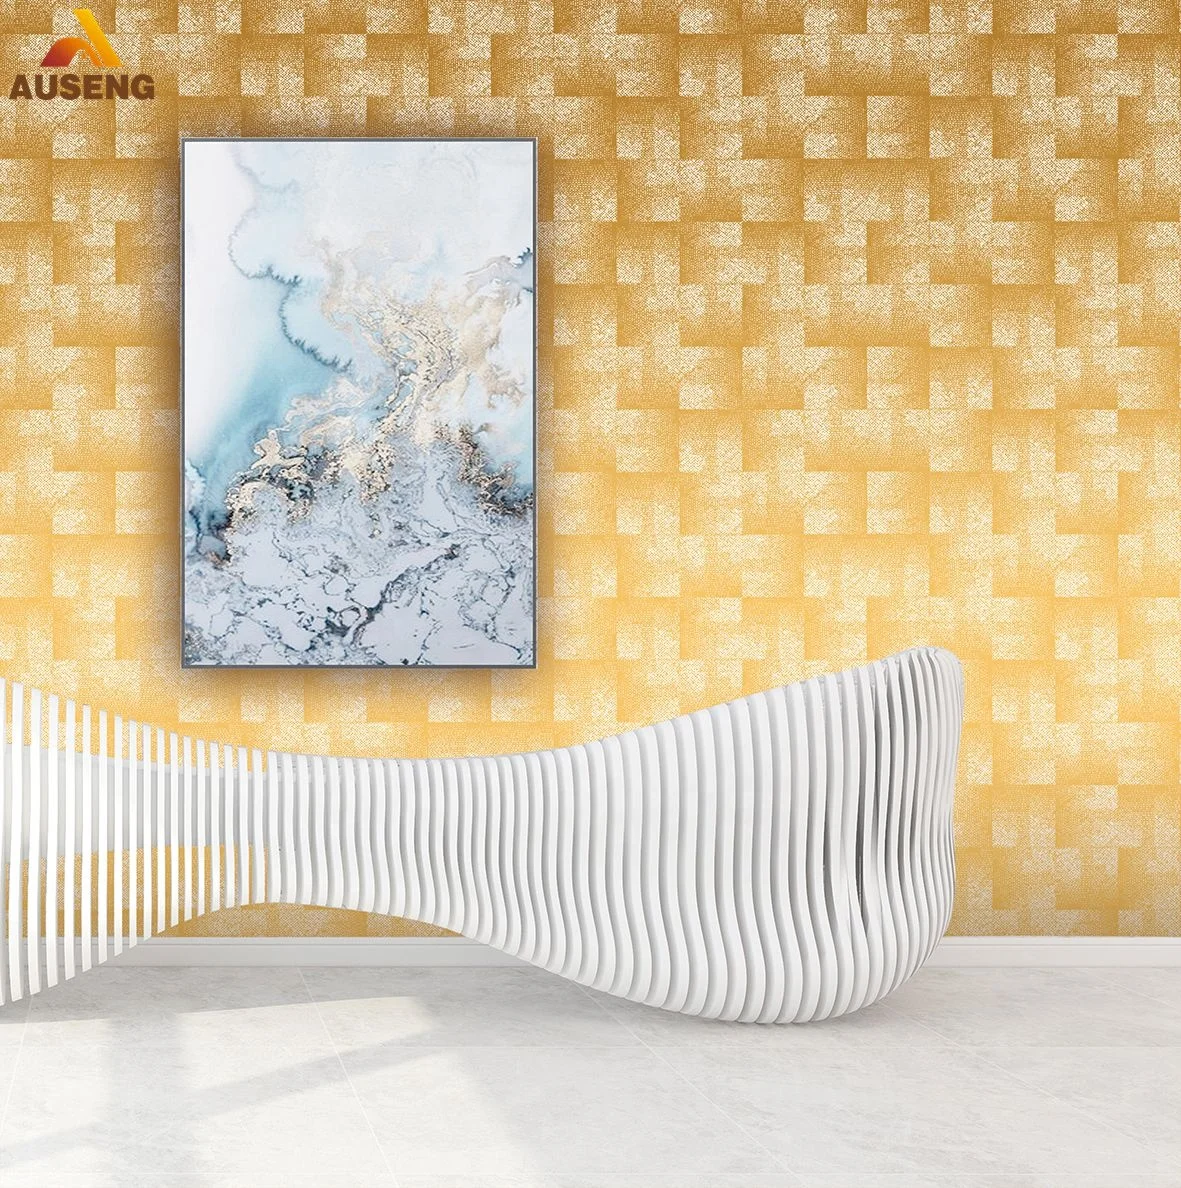 Vintage Hd Coating House Interior Shiny Fish Scales Nature Pvc 3d Wallpaper  Rolls Metallic Wallpaper - Buy Metallic Wallpaper,Nature Wallpaper,Vintage  Wallpaper Product on 